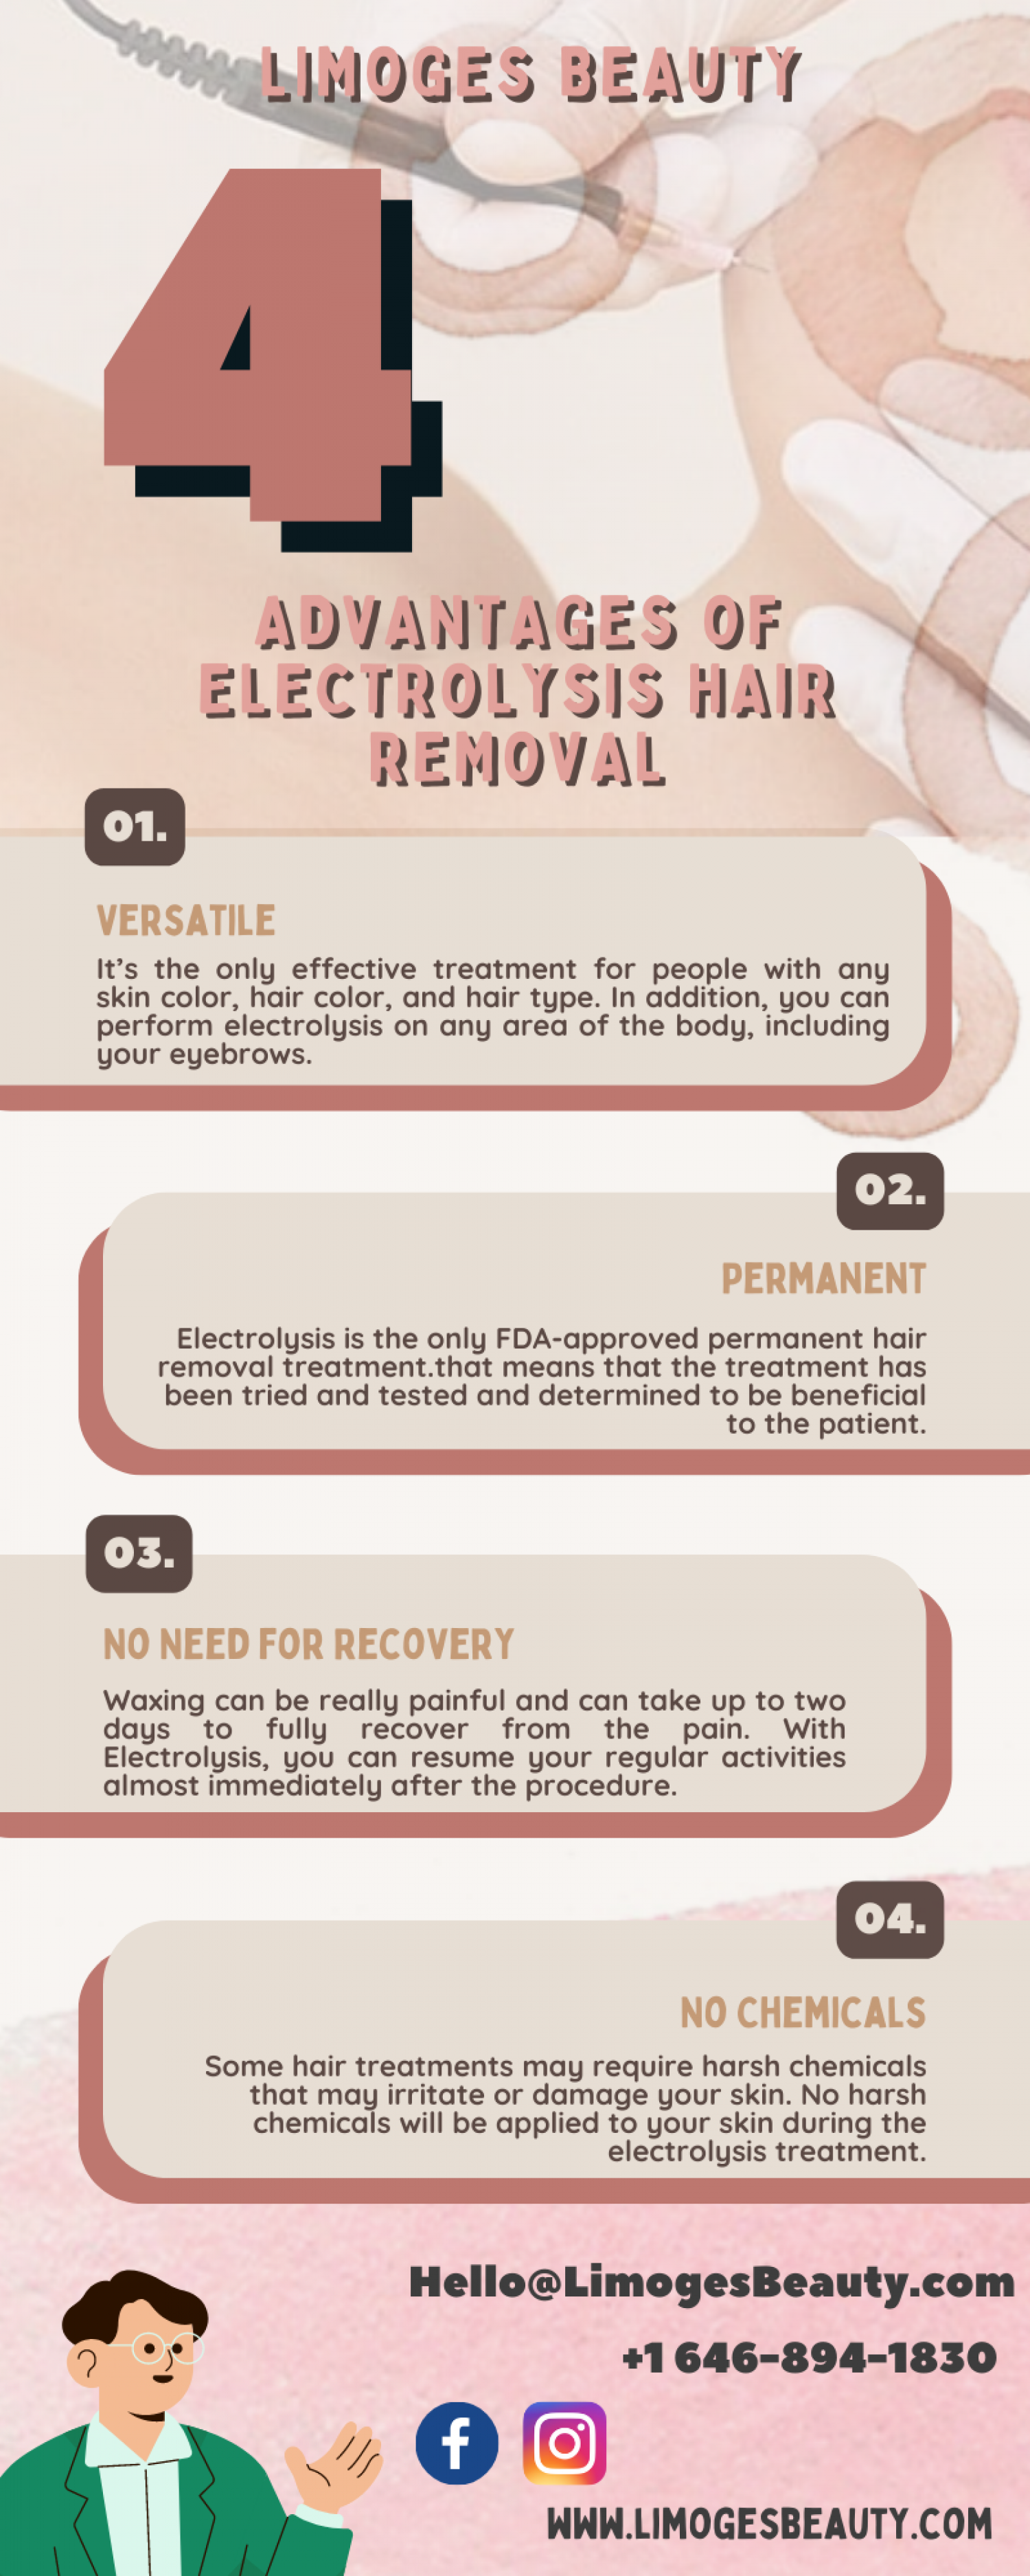 Advantages of Electrolysis Hair Removal Infographic